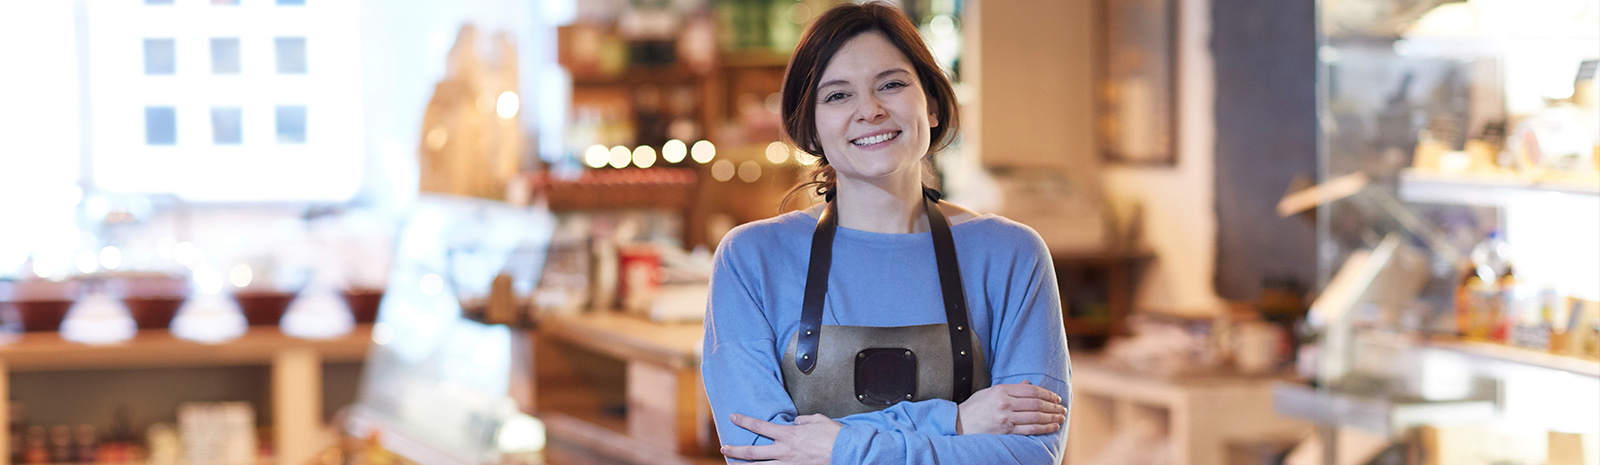 Female bake shop owner with arms crossed smiling.